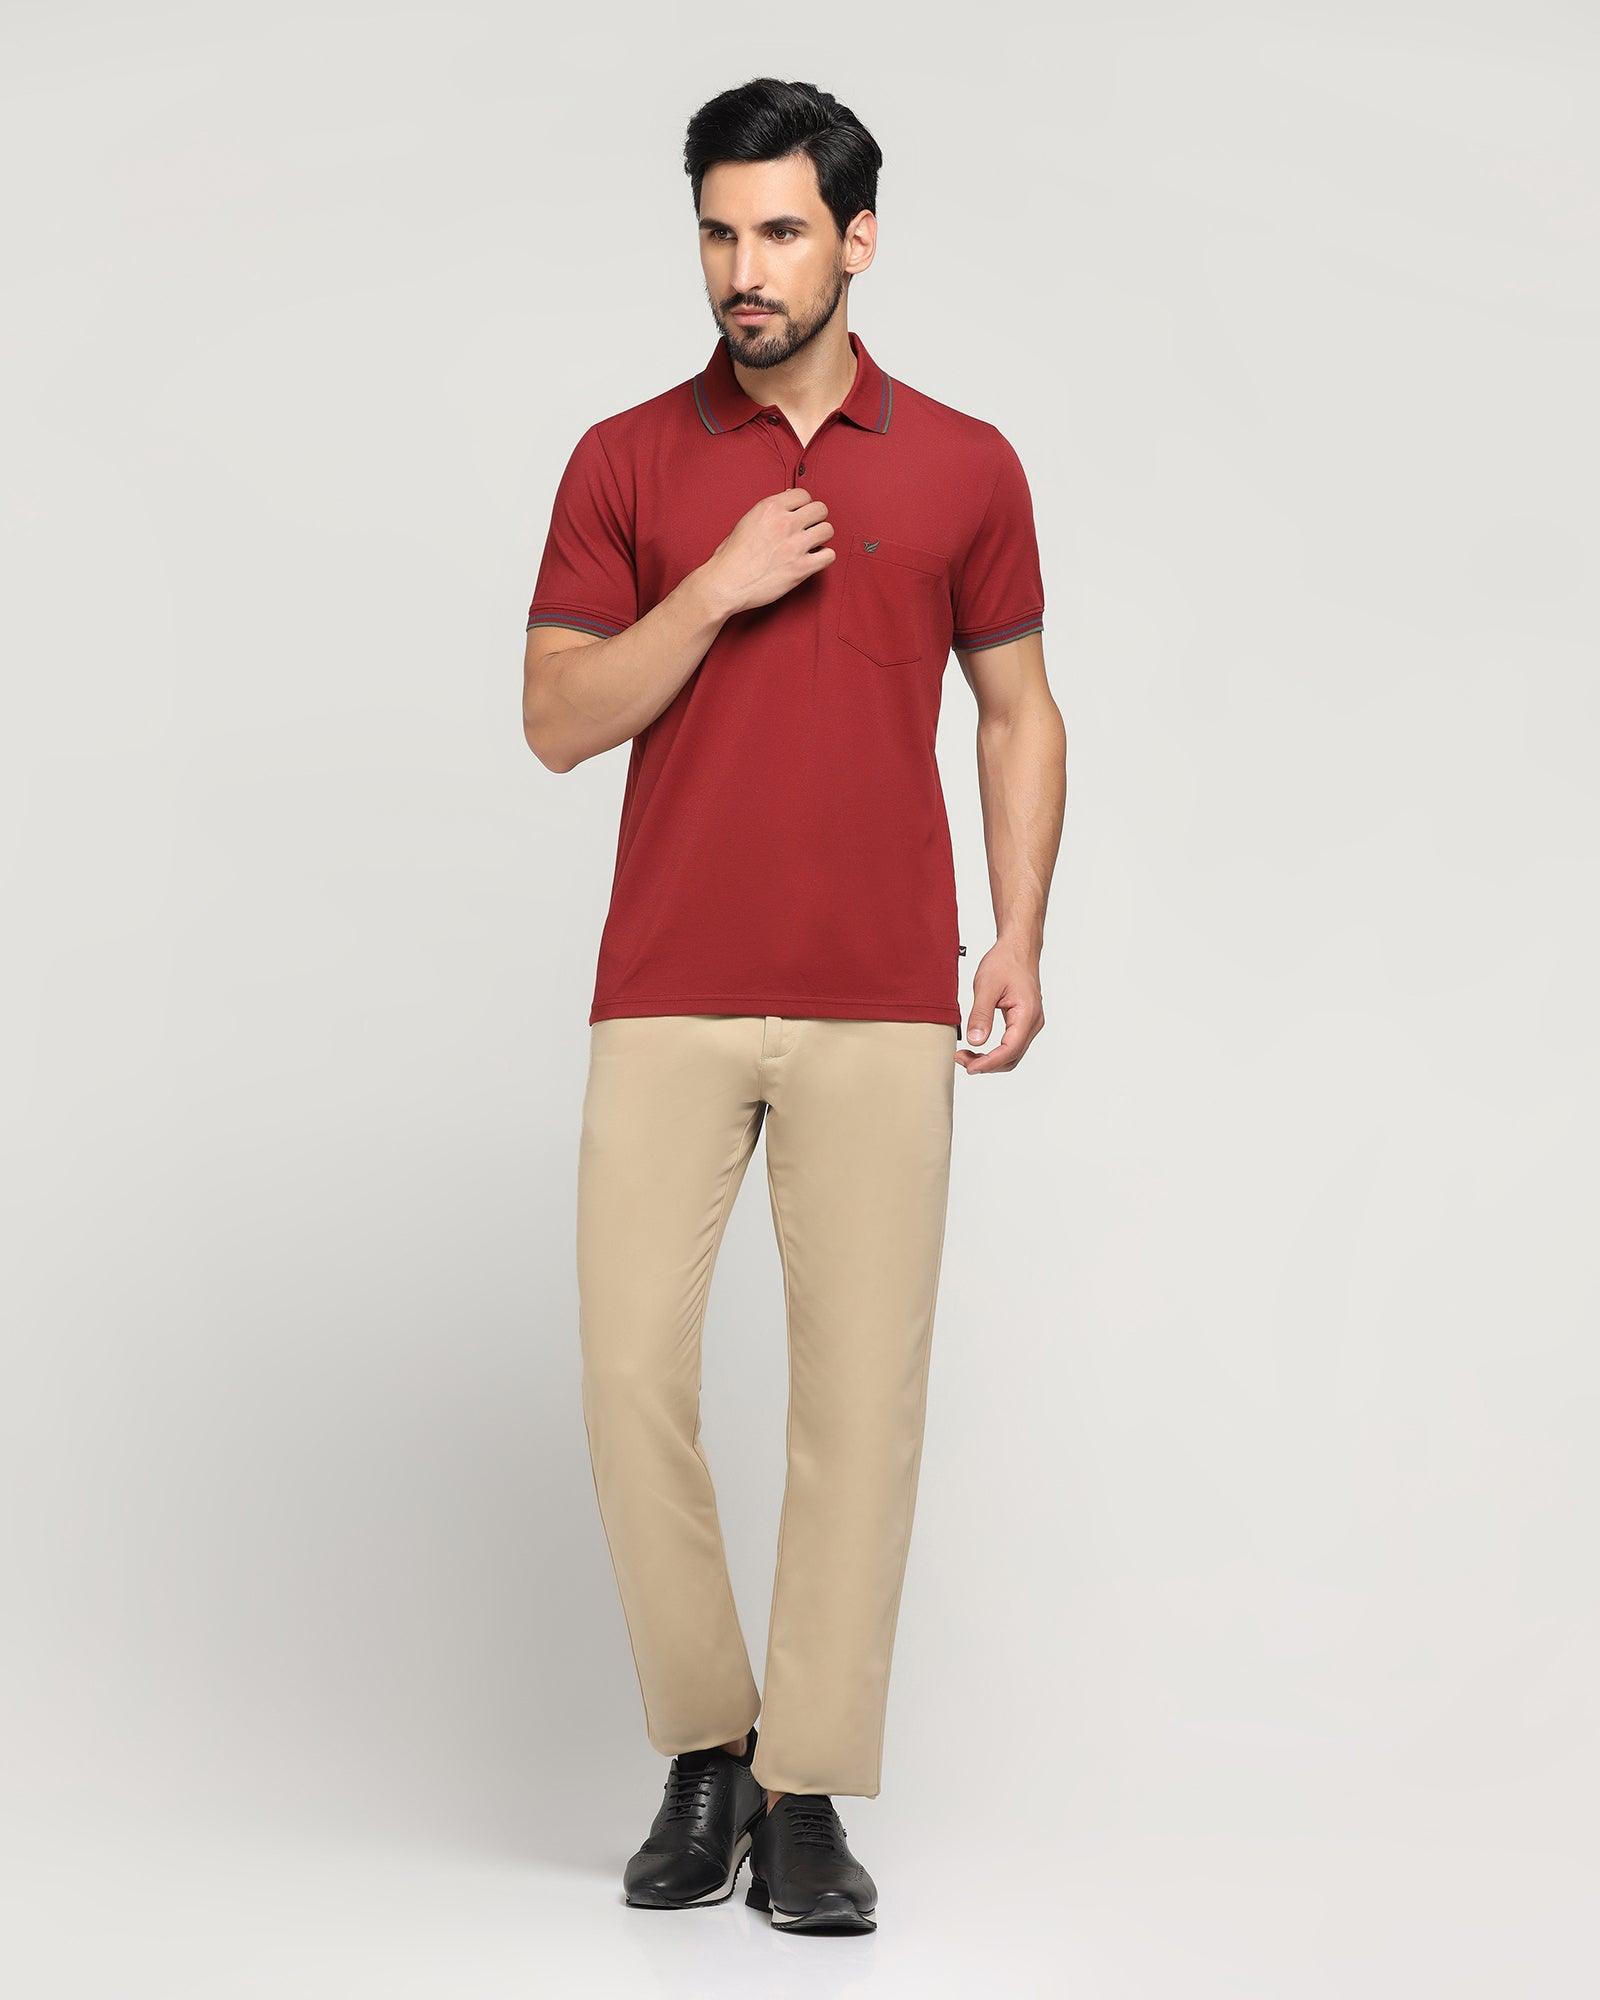 Dark Red & Maroon Pants For Guy's With Shirts Combination Outfits Ideas  2022 | Red pants outfit, Burgundy pants outfit, Burgundy pants men